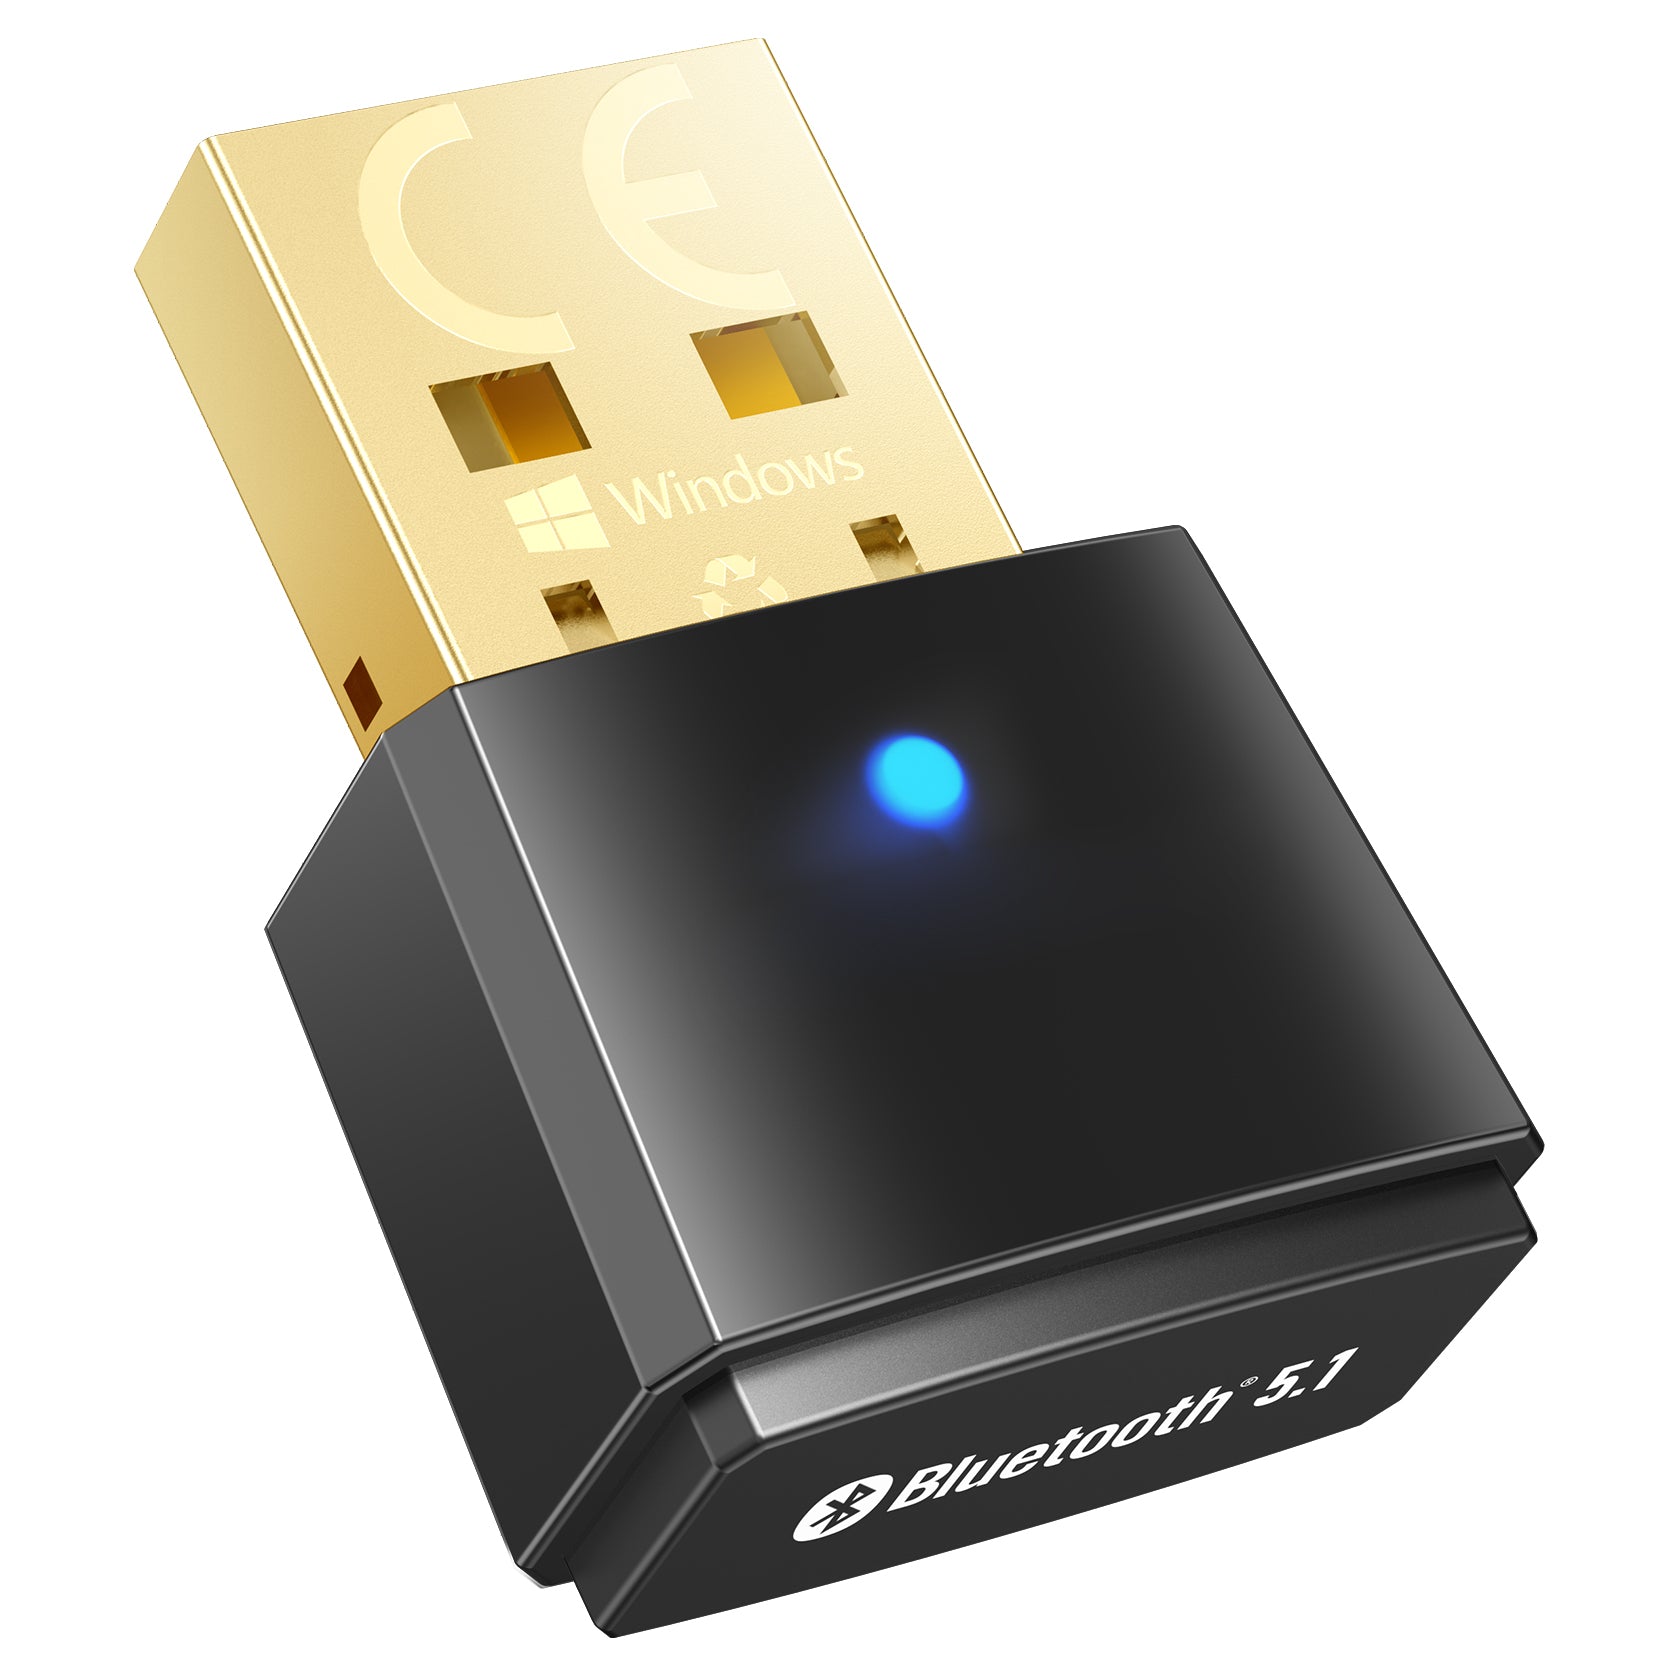 Bluetooth Adapters for PC – Micro Bluetooth 5.0 USB Adapter with